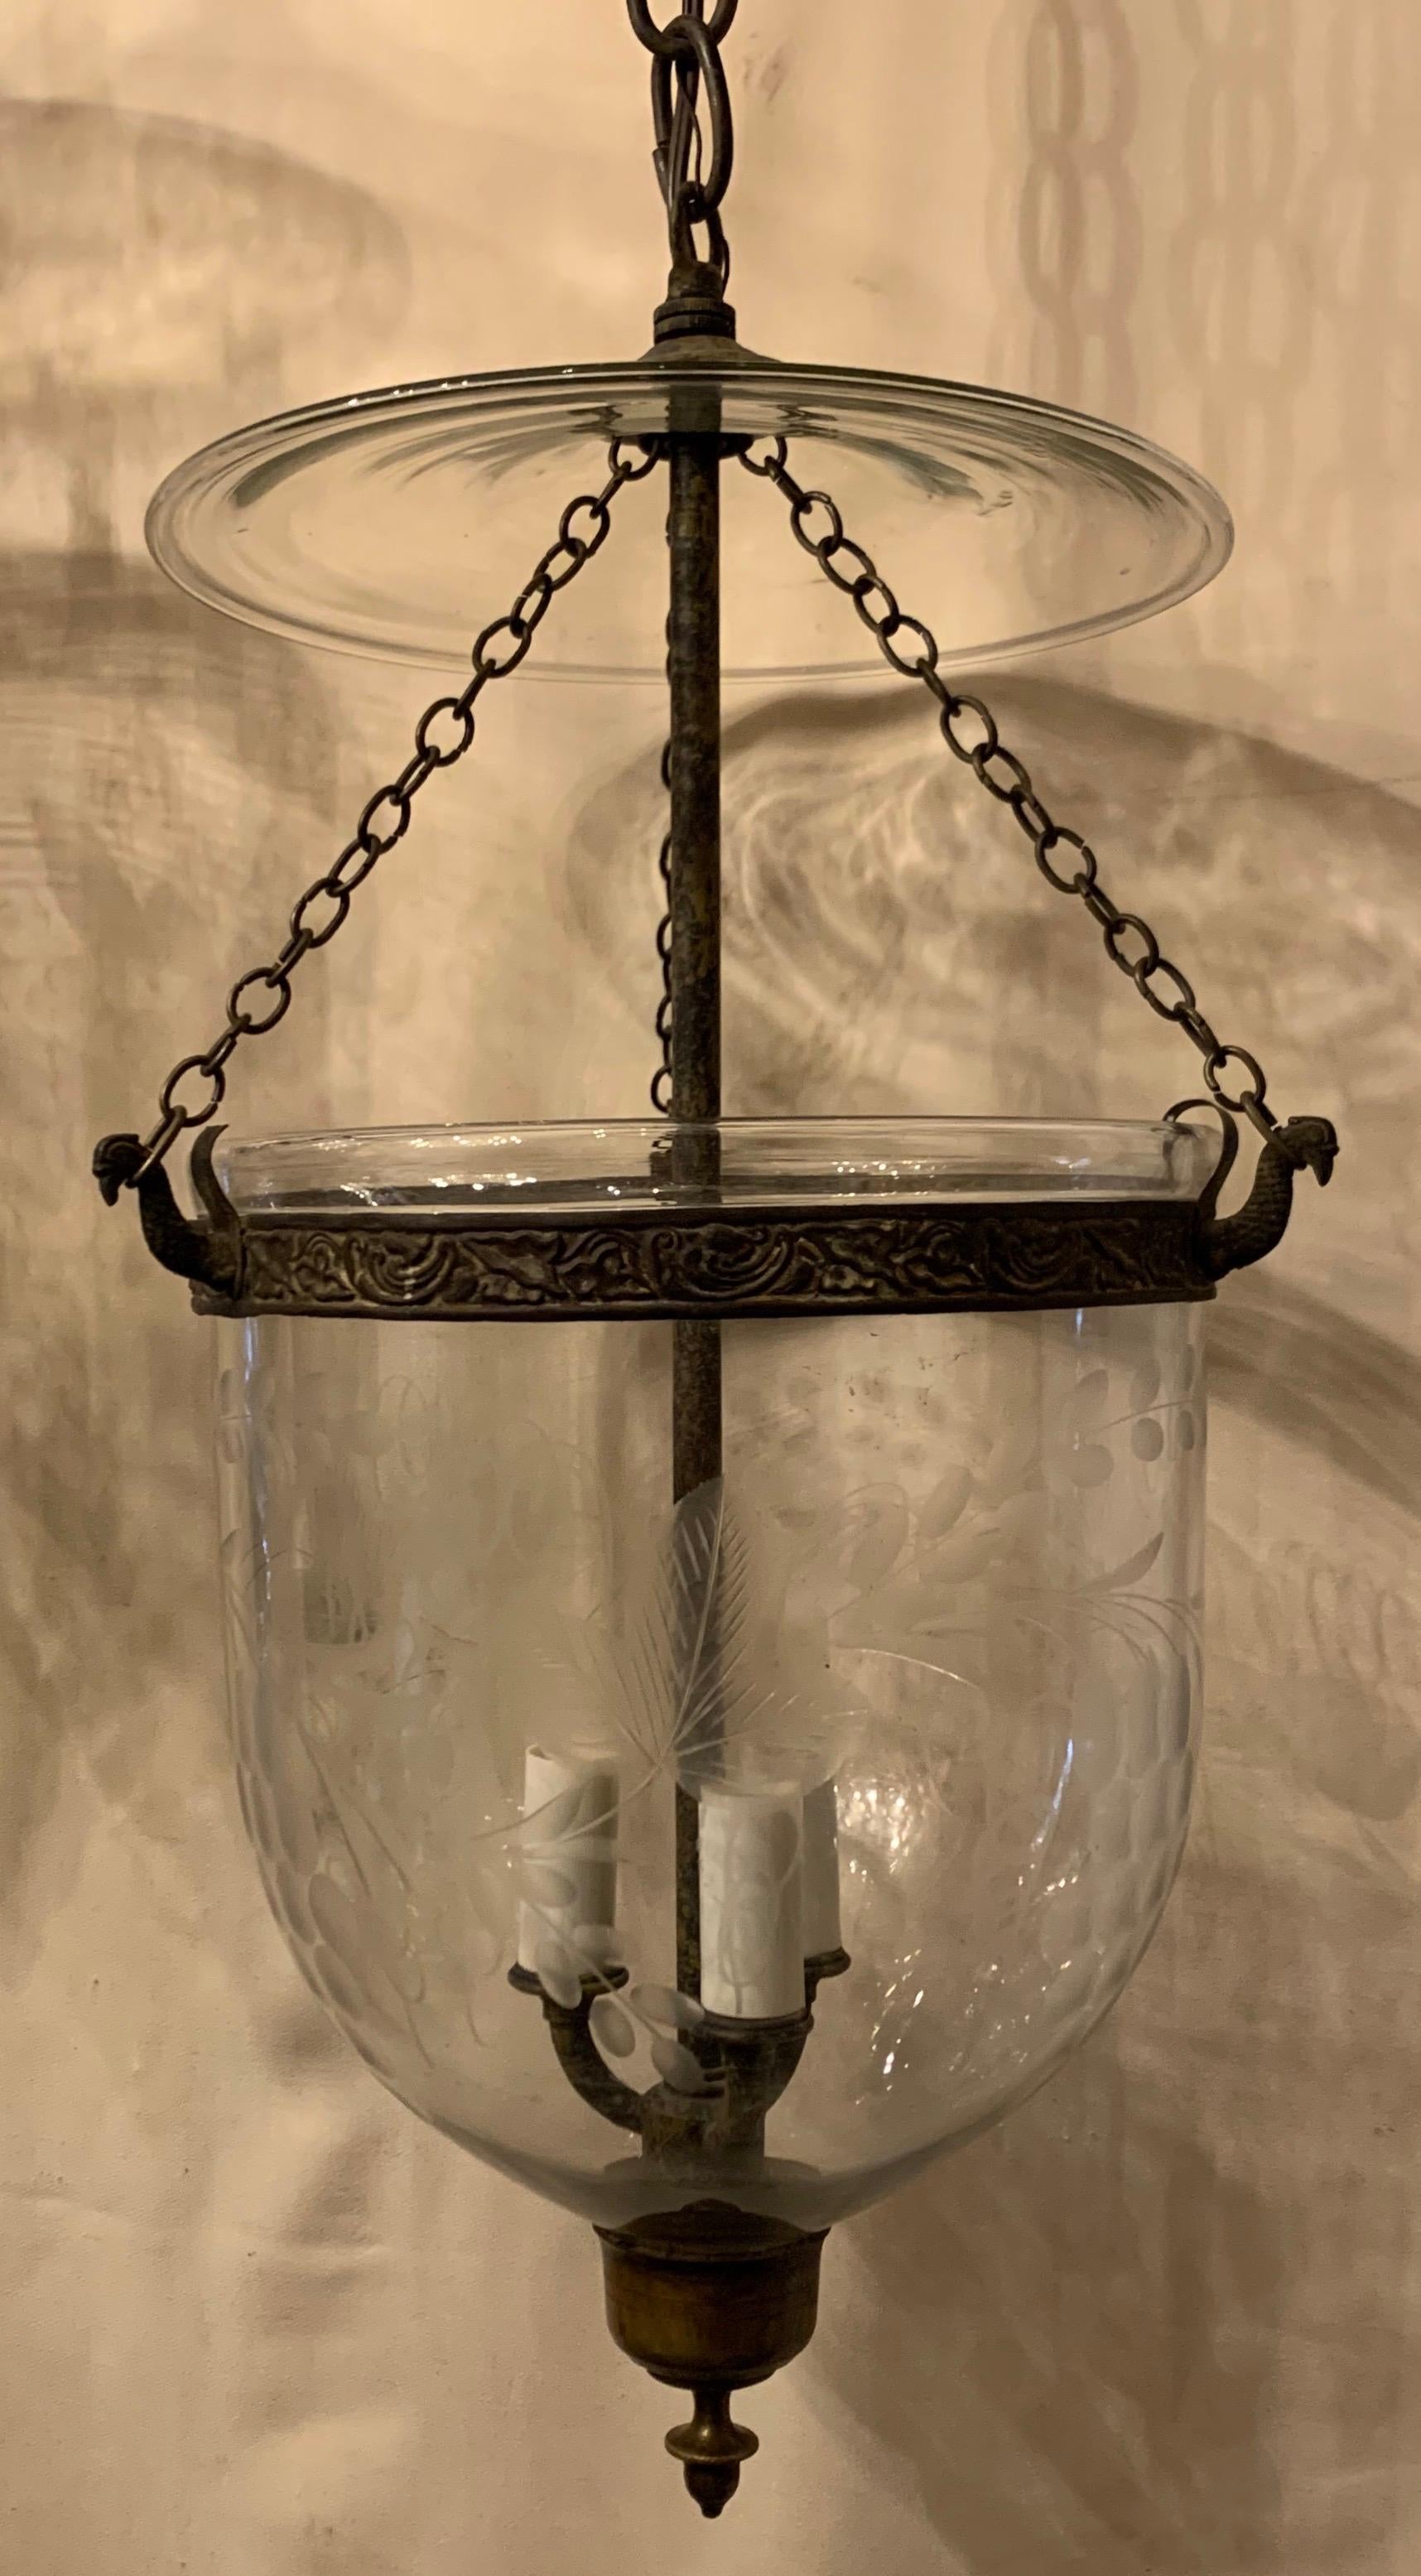 A wonderful pair of etched glass leaves and grapes bell jar lanterns with gilded bronze housing fixtures
Each with 3 newly wired candelabra lights on the interior, accompanied by canopy chain and mounting hardware for installation.
In the manner